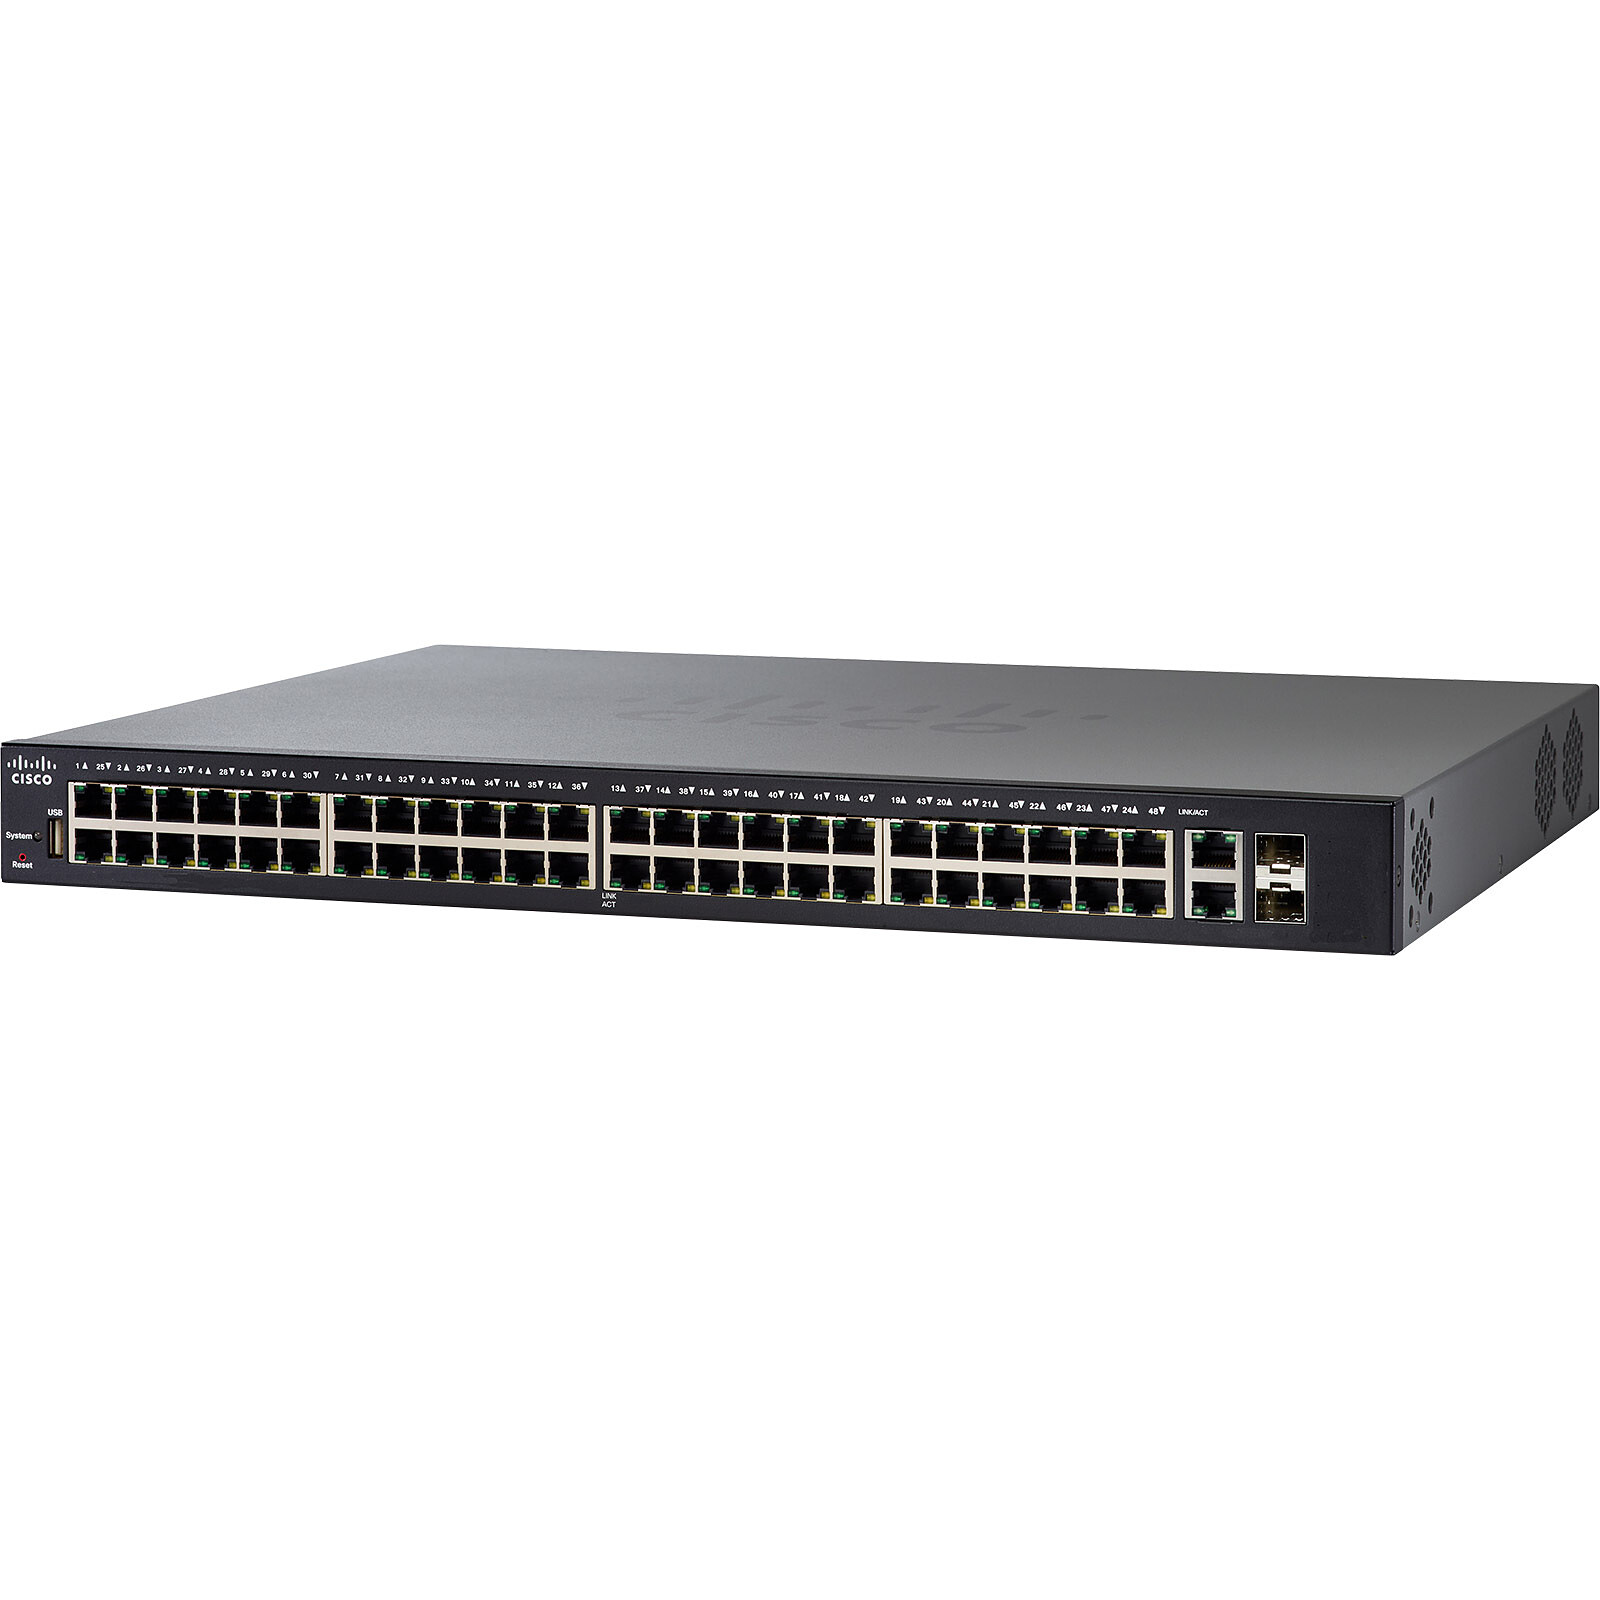 Cisco SG250-50P - Network switch Cisco Systems on LDLC | Holy Moley